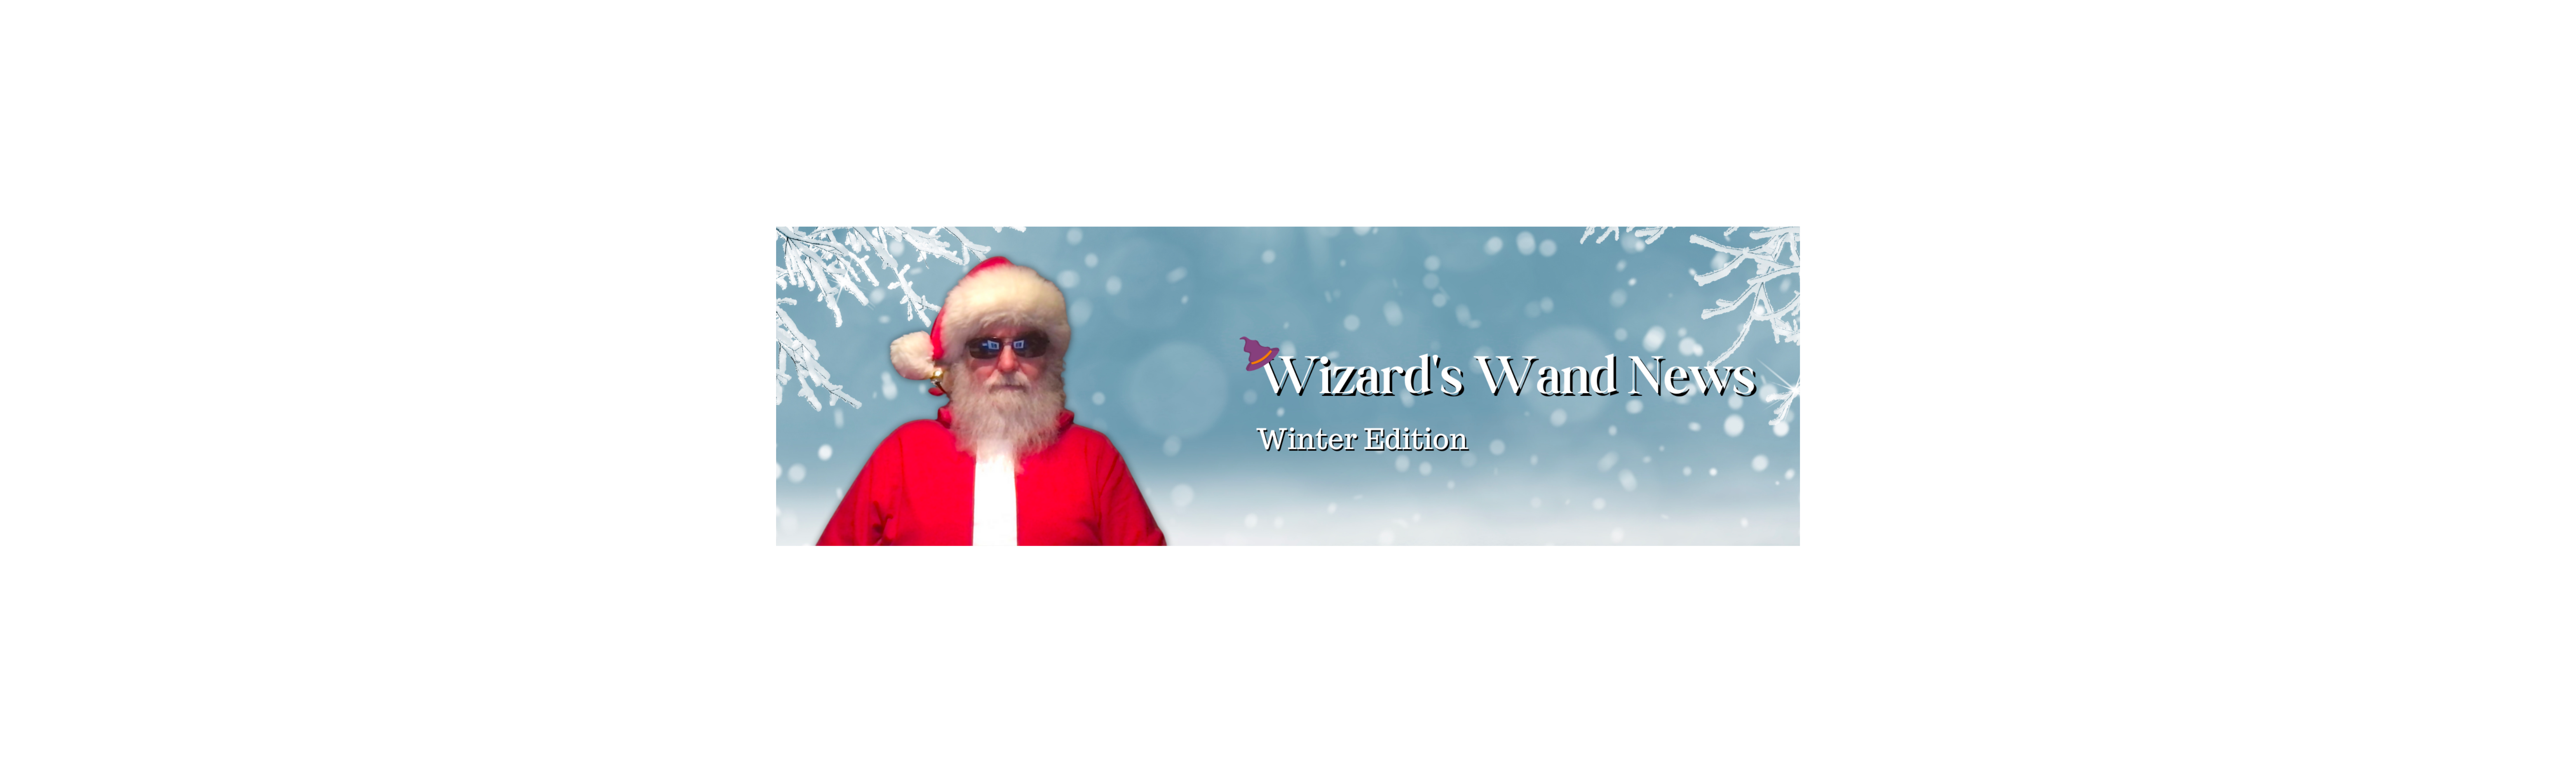 The Wizard's Wand News - November Release